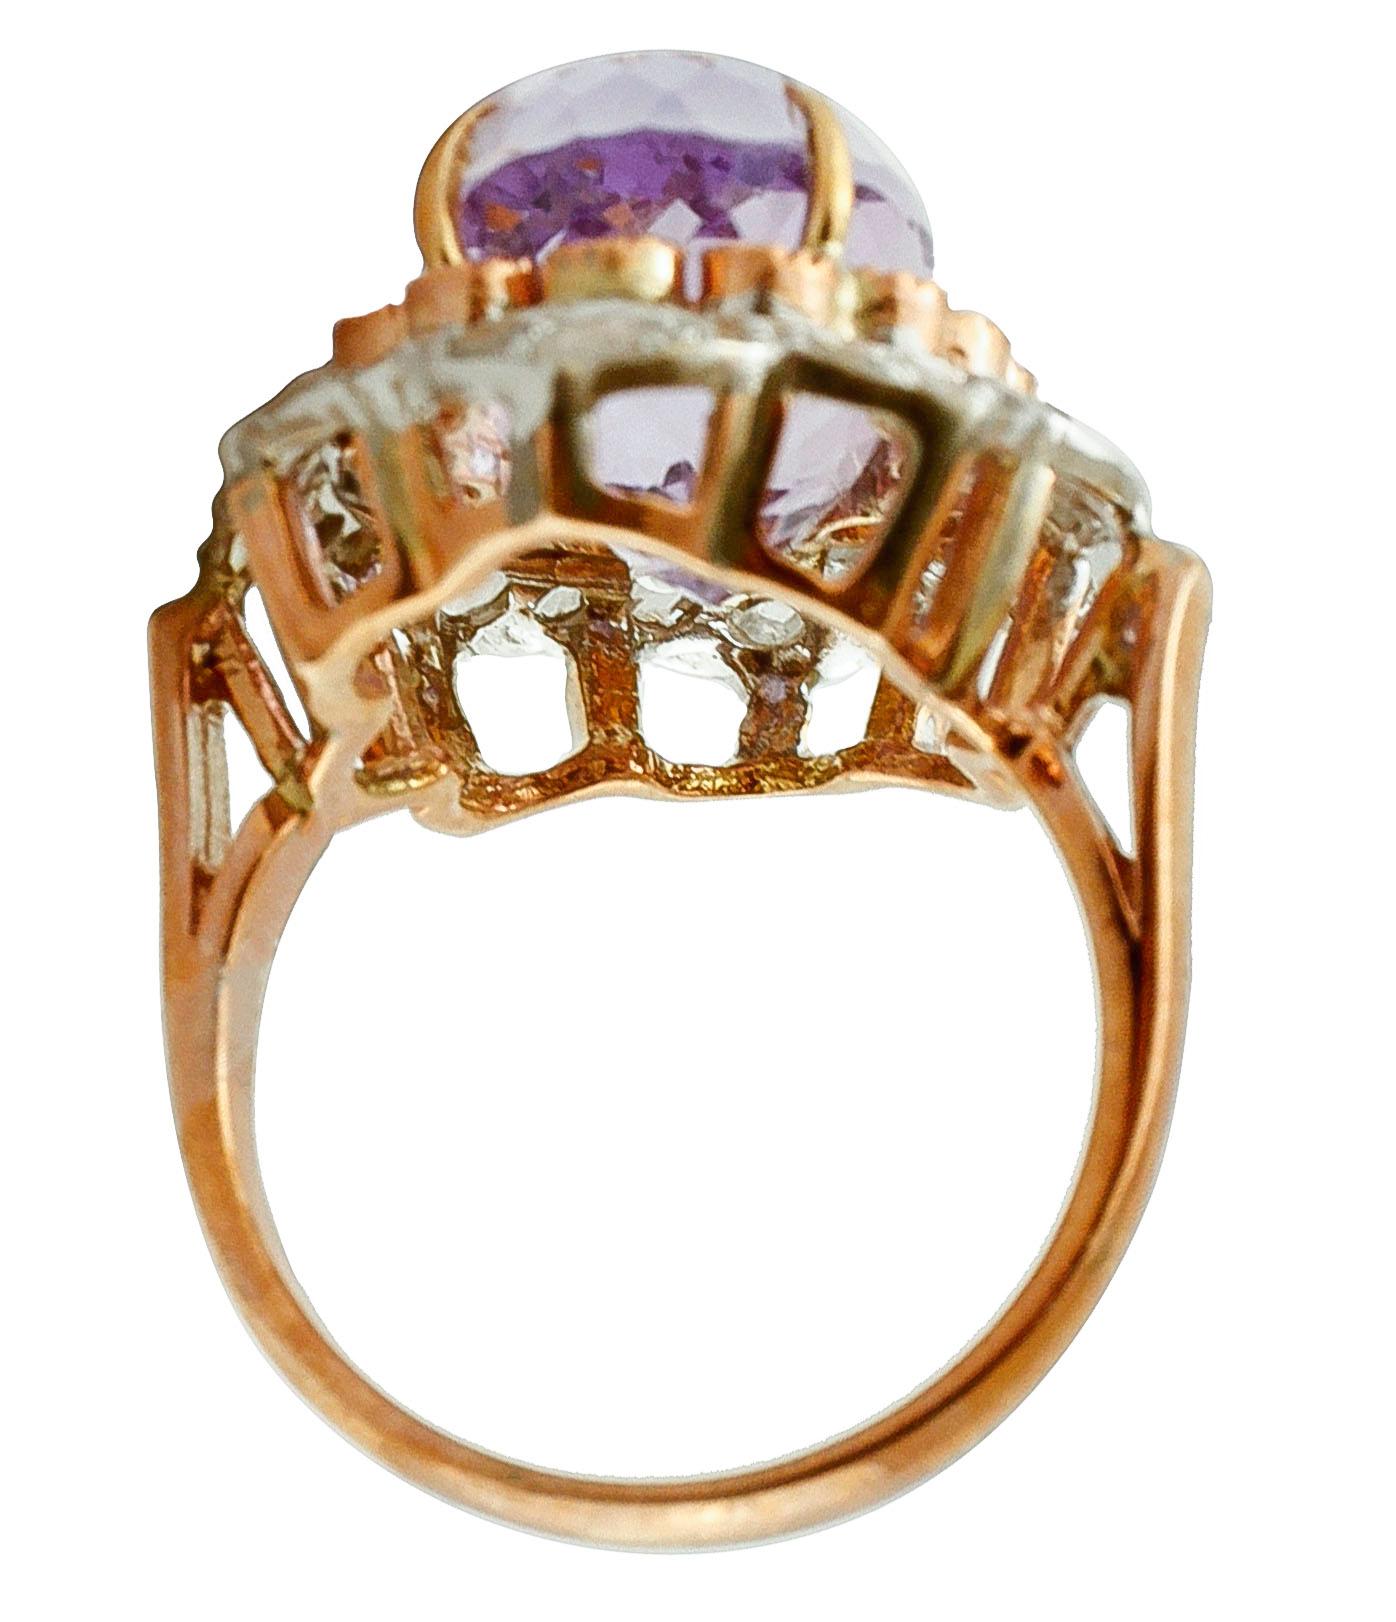 Mixed Cut Diamonds, Yellow Topazes, Amethyst, 9 Karat Gold and Silver Cluster Fashion Ring